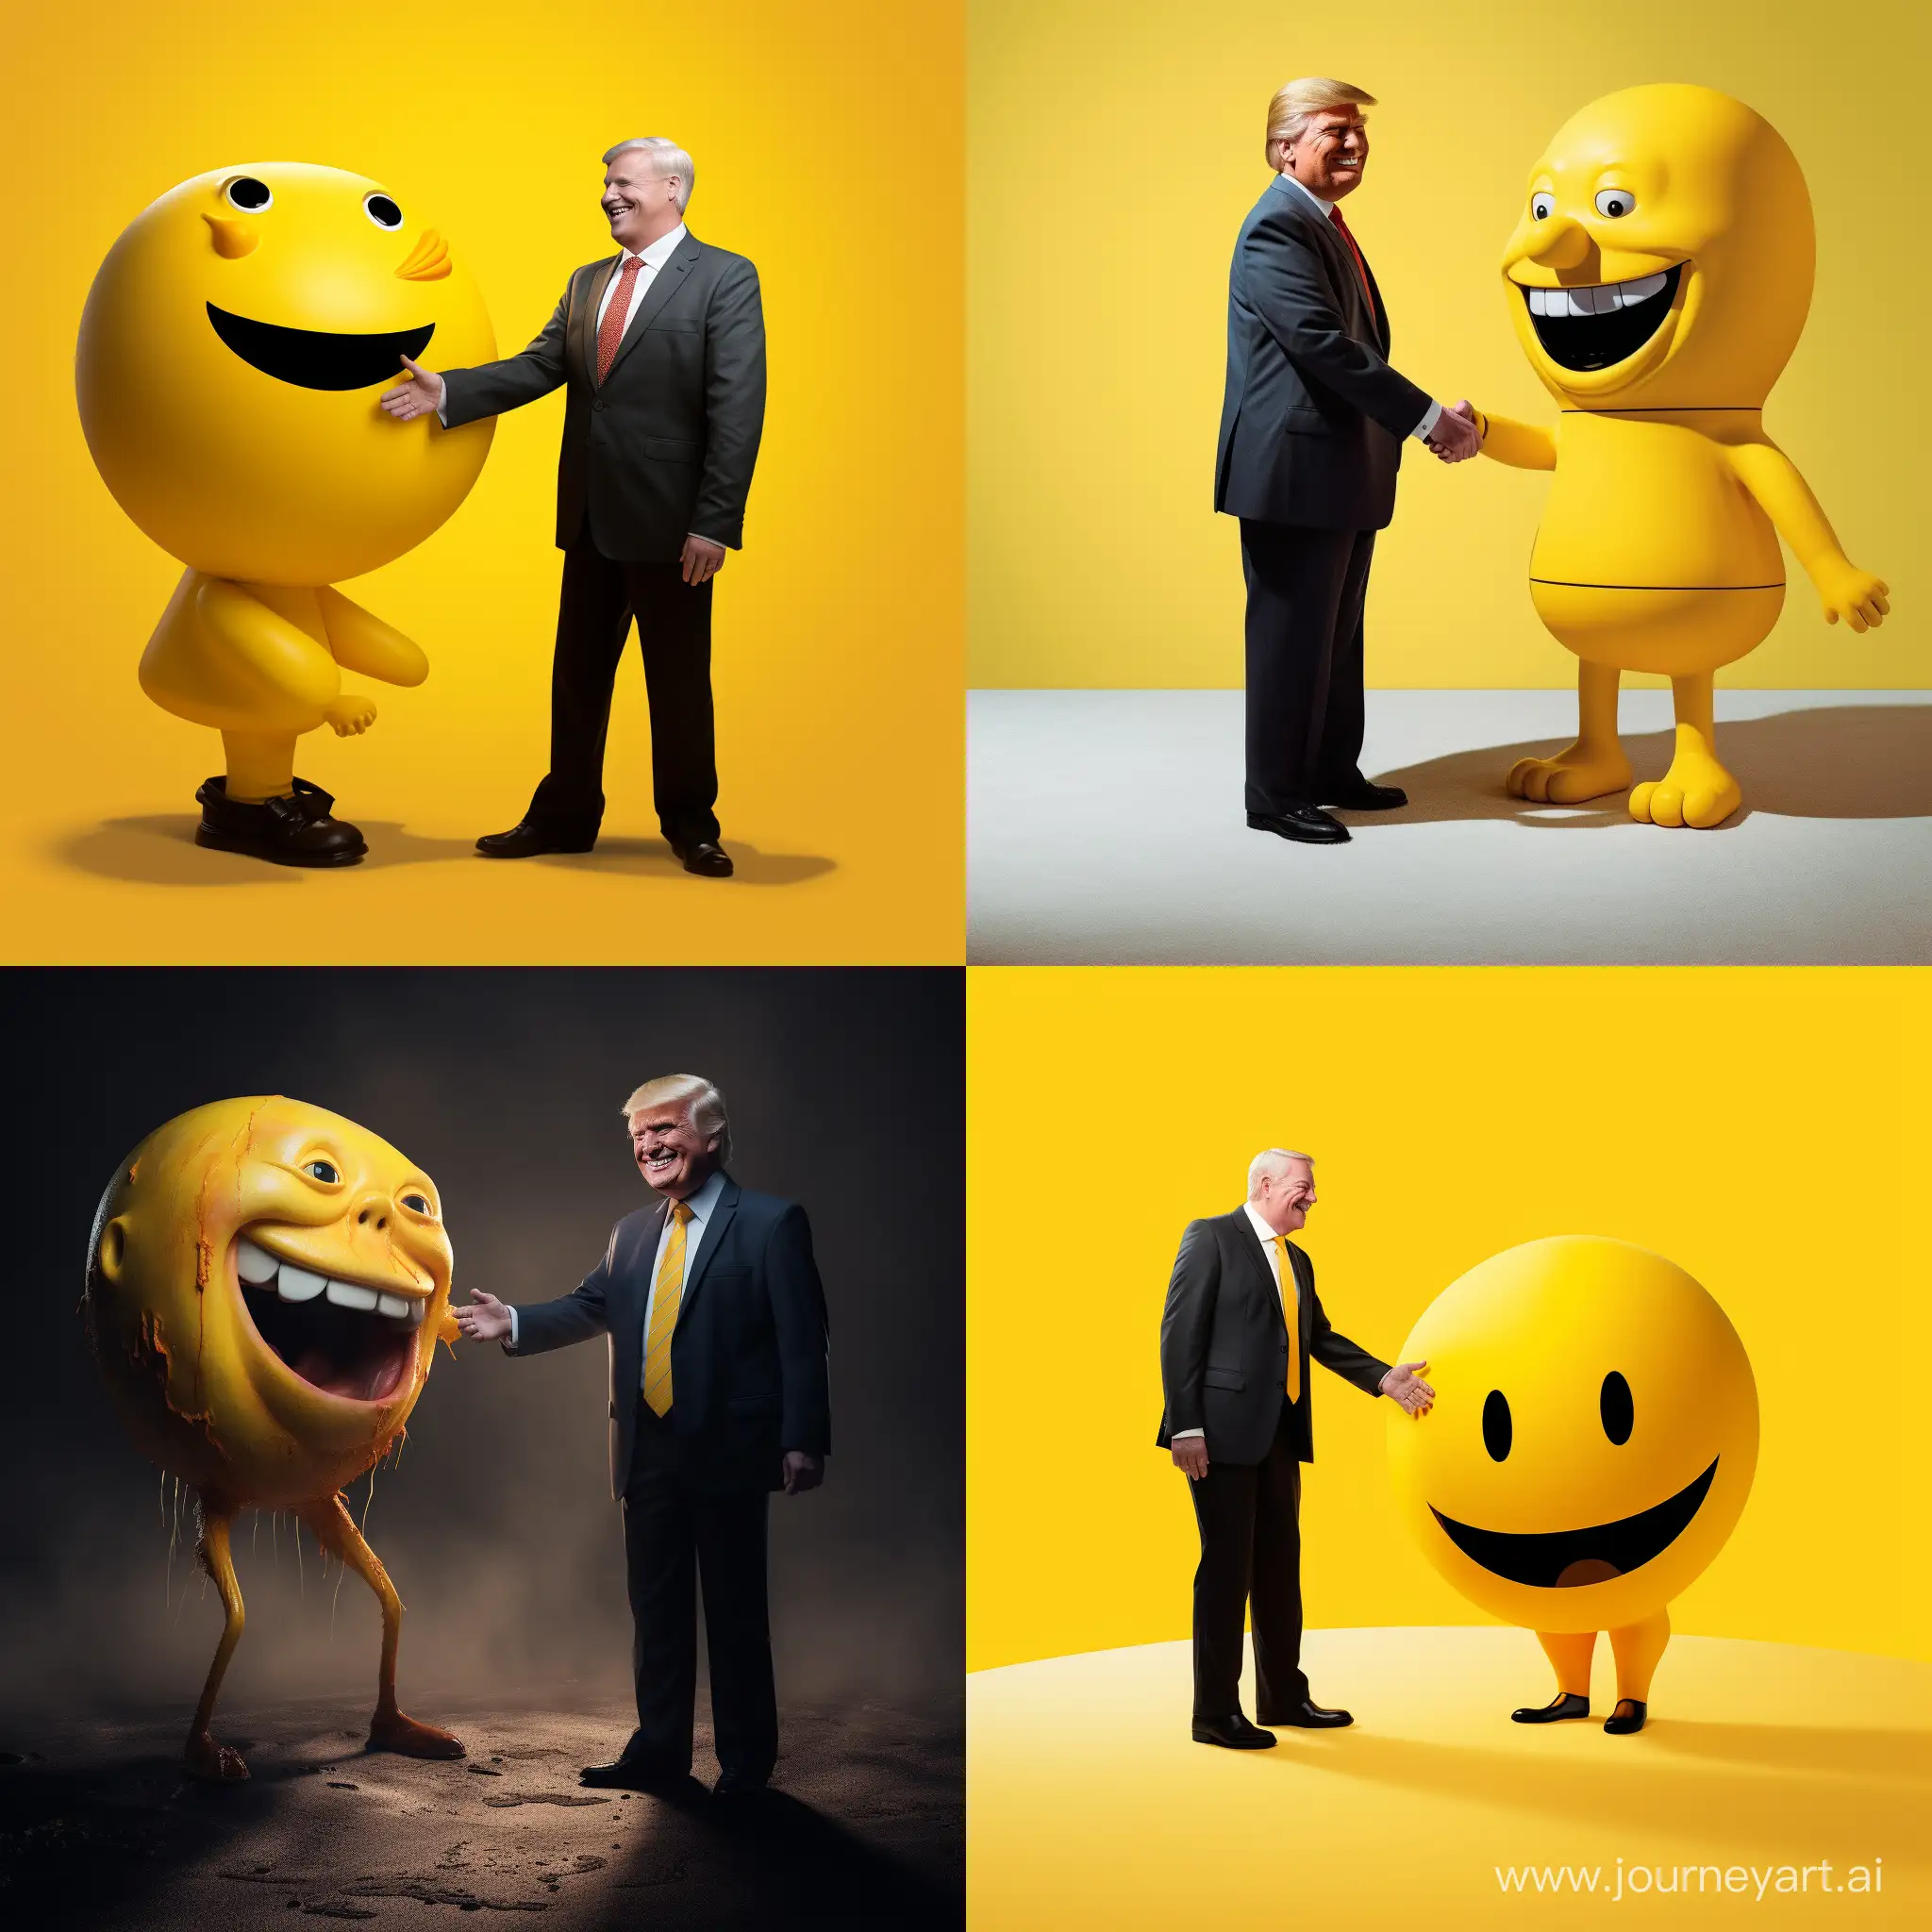 smiley figure shaking the hand of donald trump